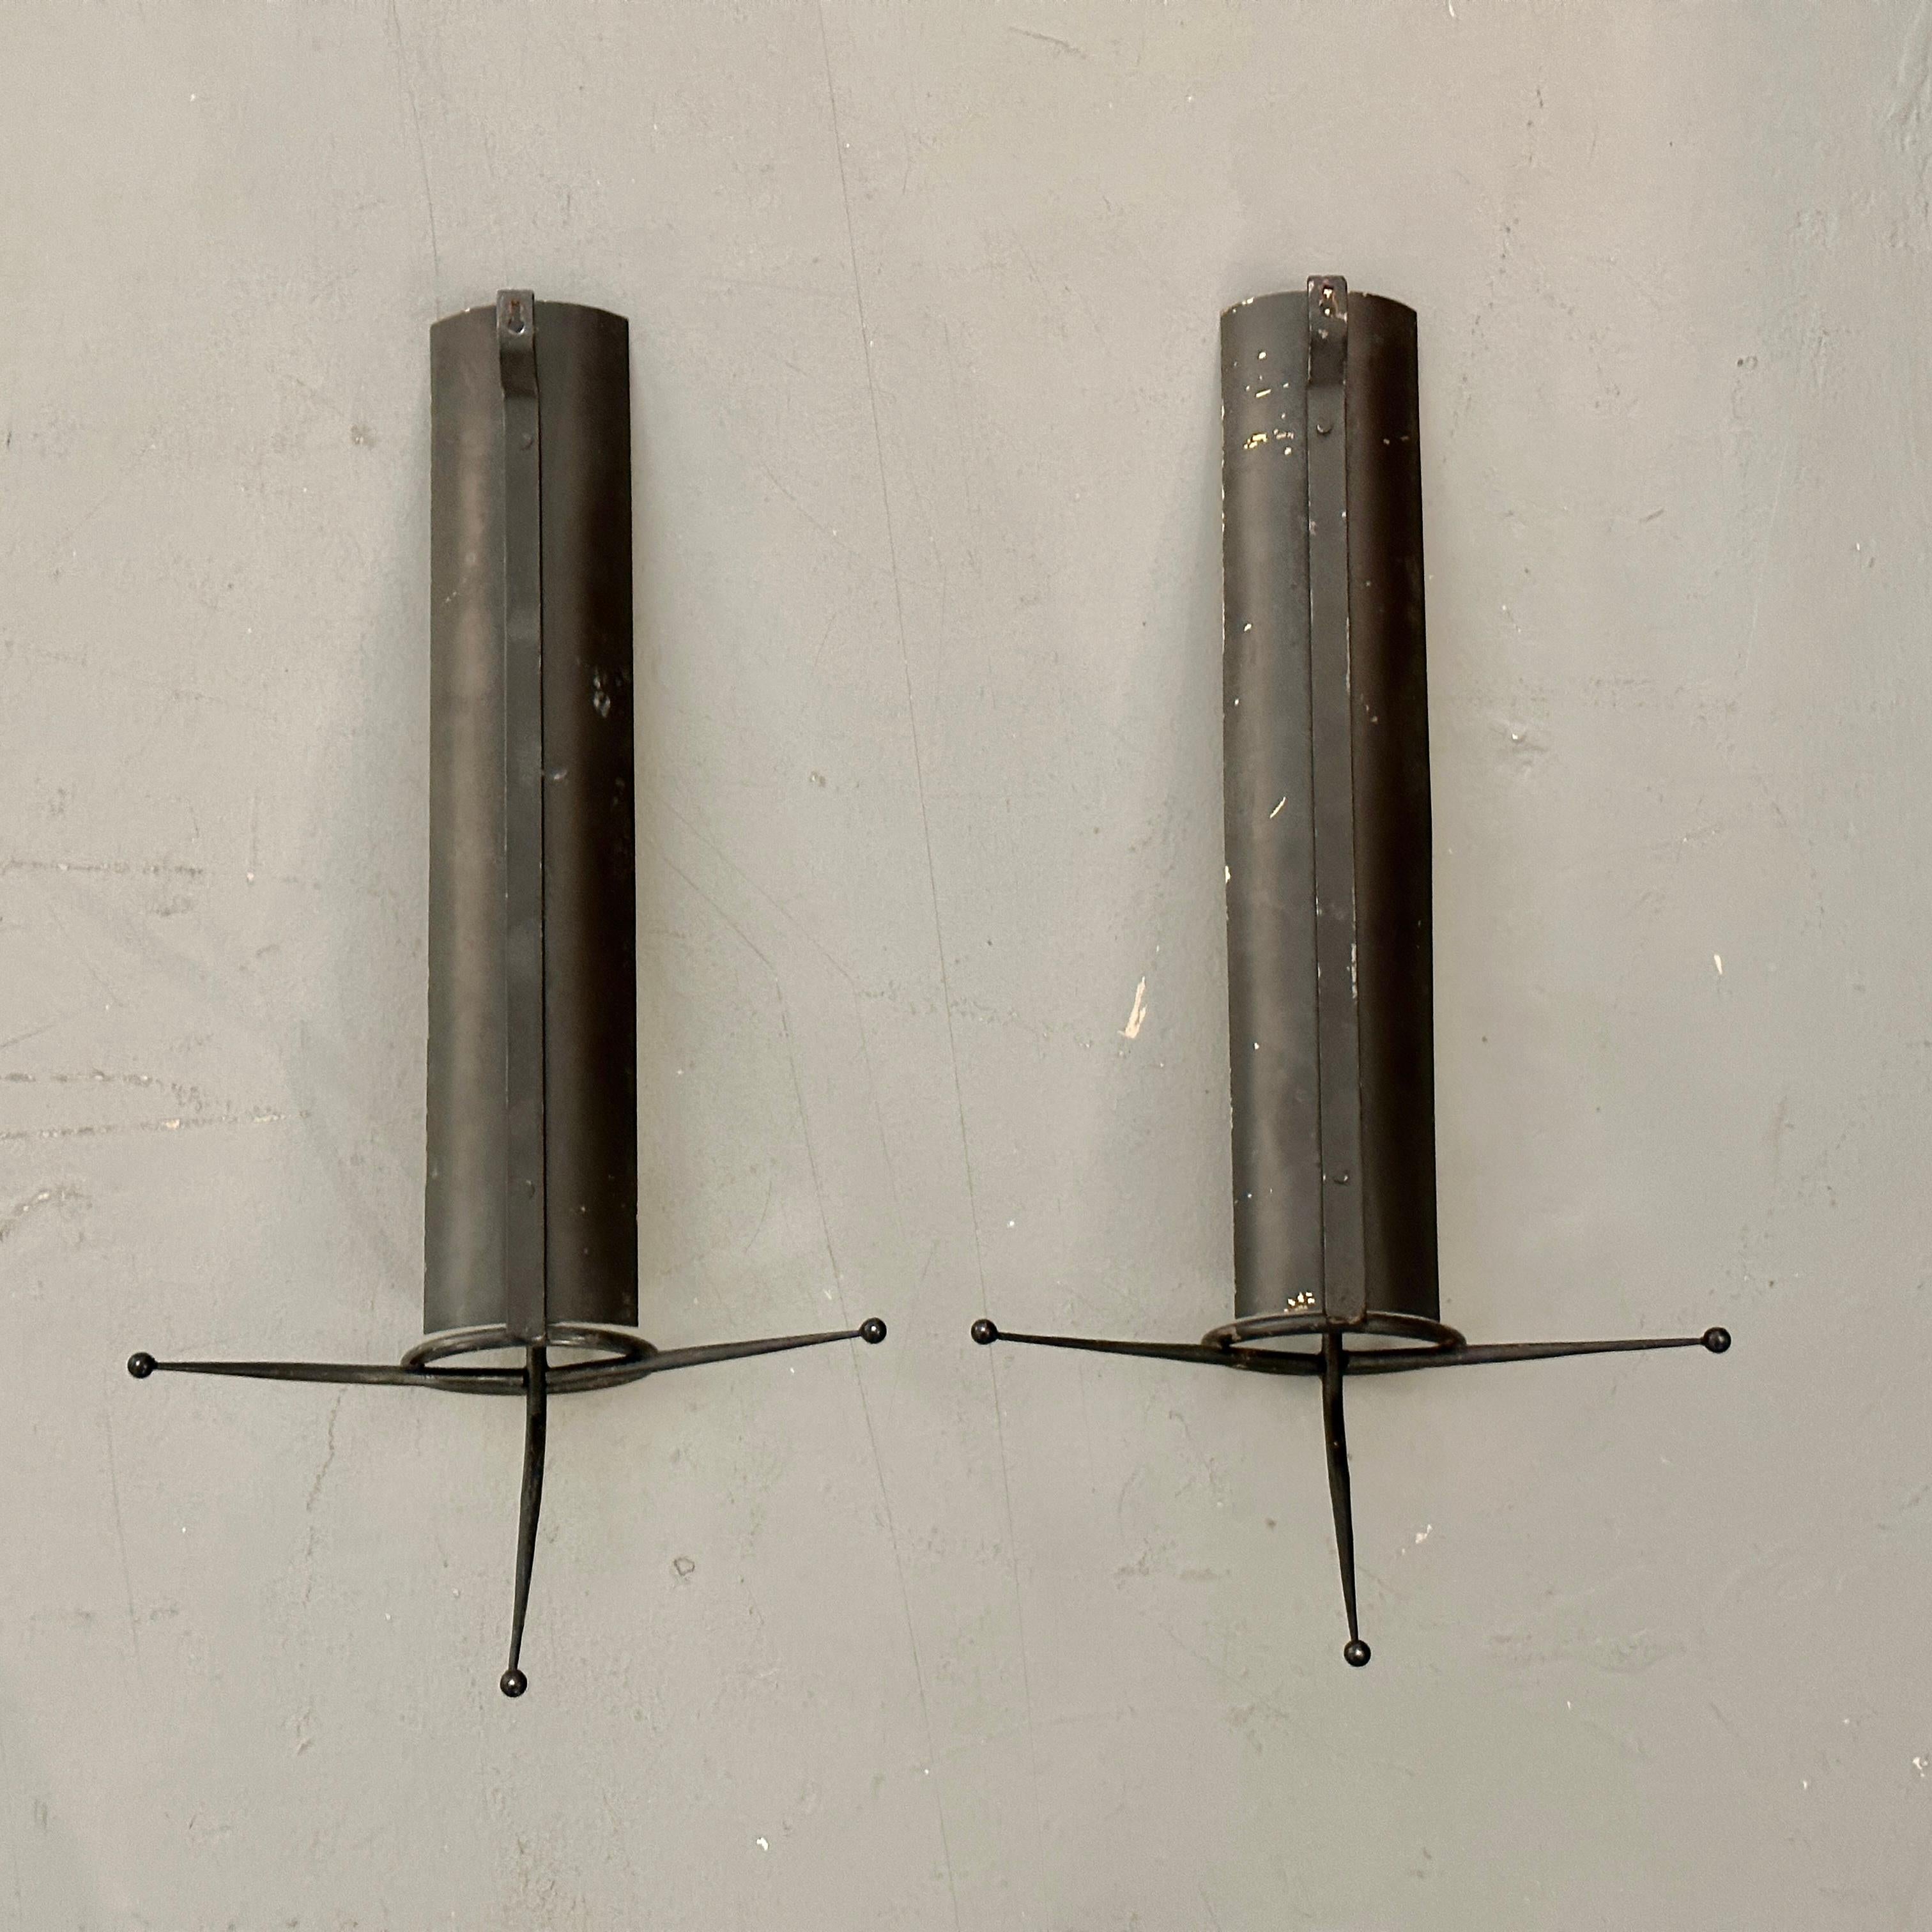 American Tony Paul Pair Atomic Brass and Metal Candle Sconces, ca 1950s